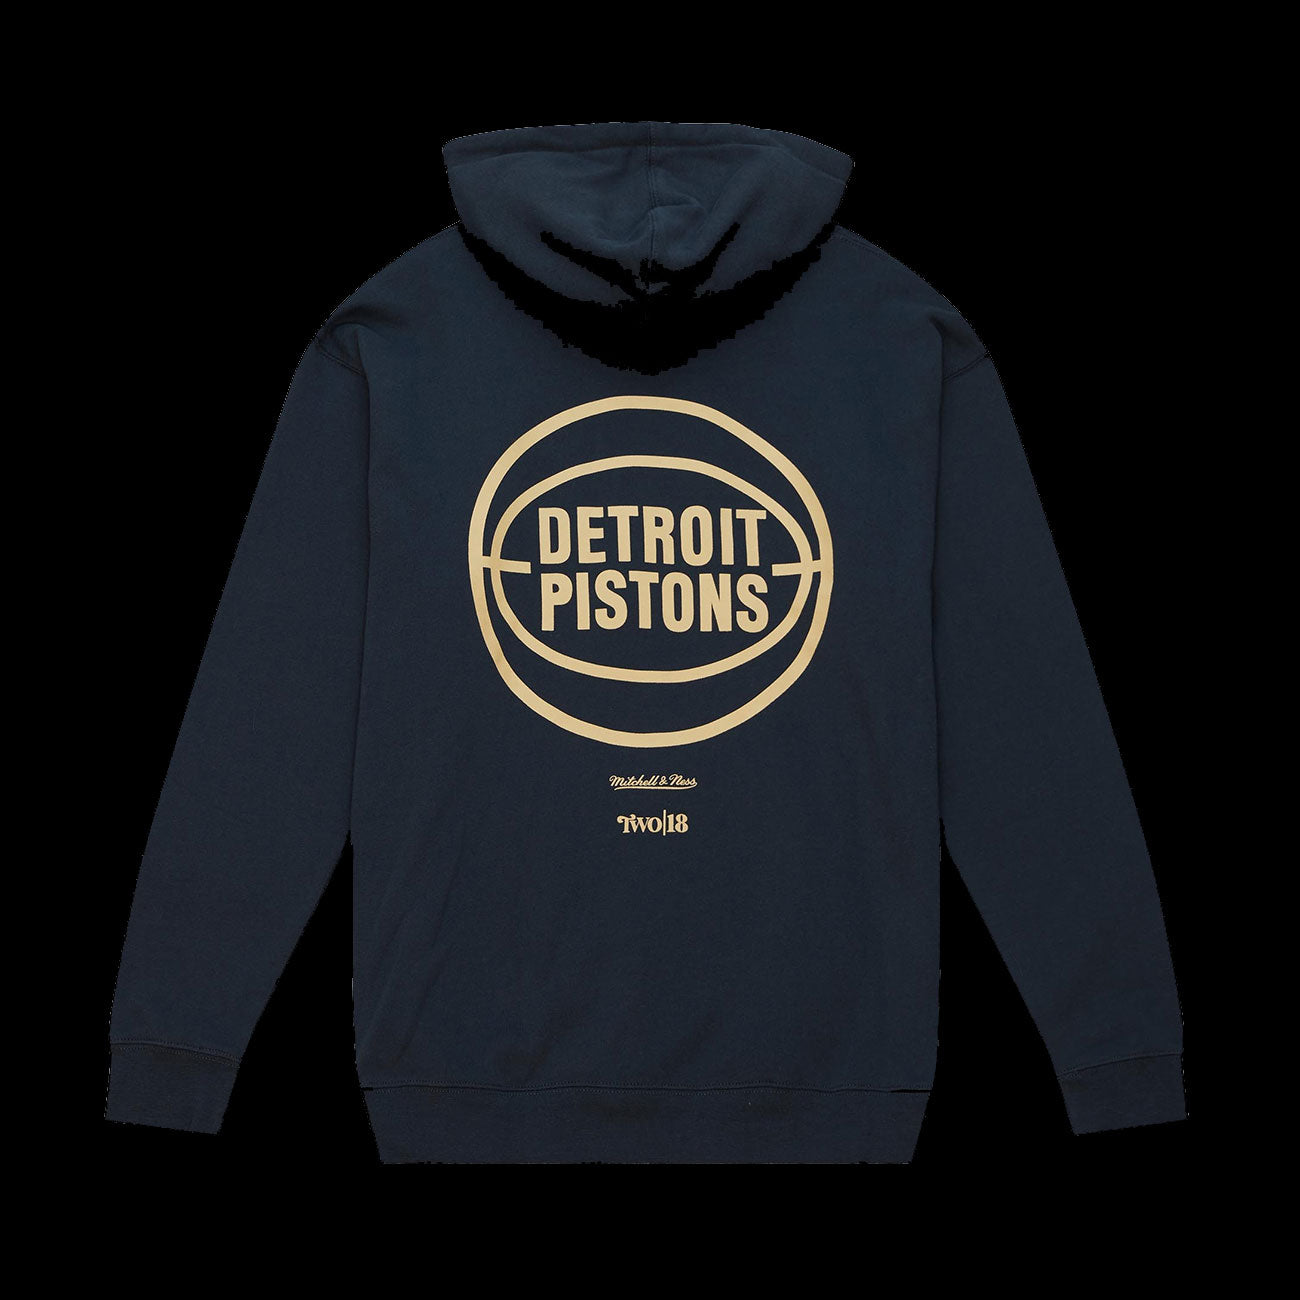 Mitchell & Ness x Two18 Detroit Pistons Hoodie (Blue/Grey)